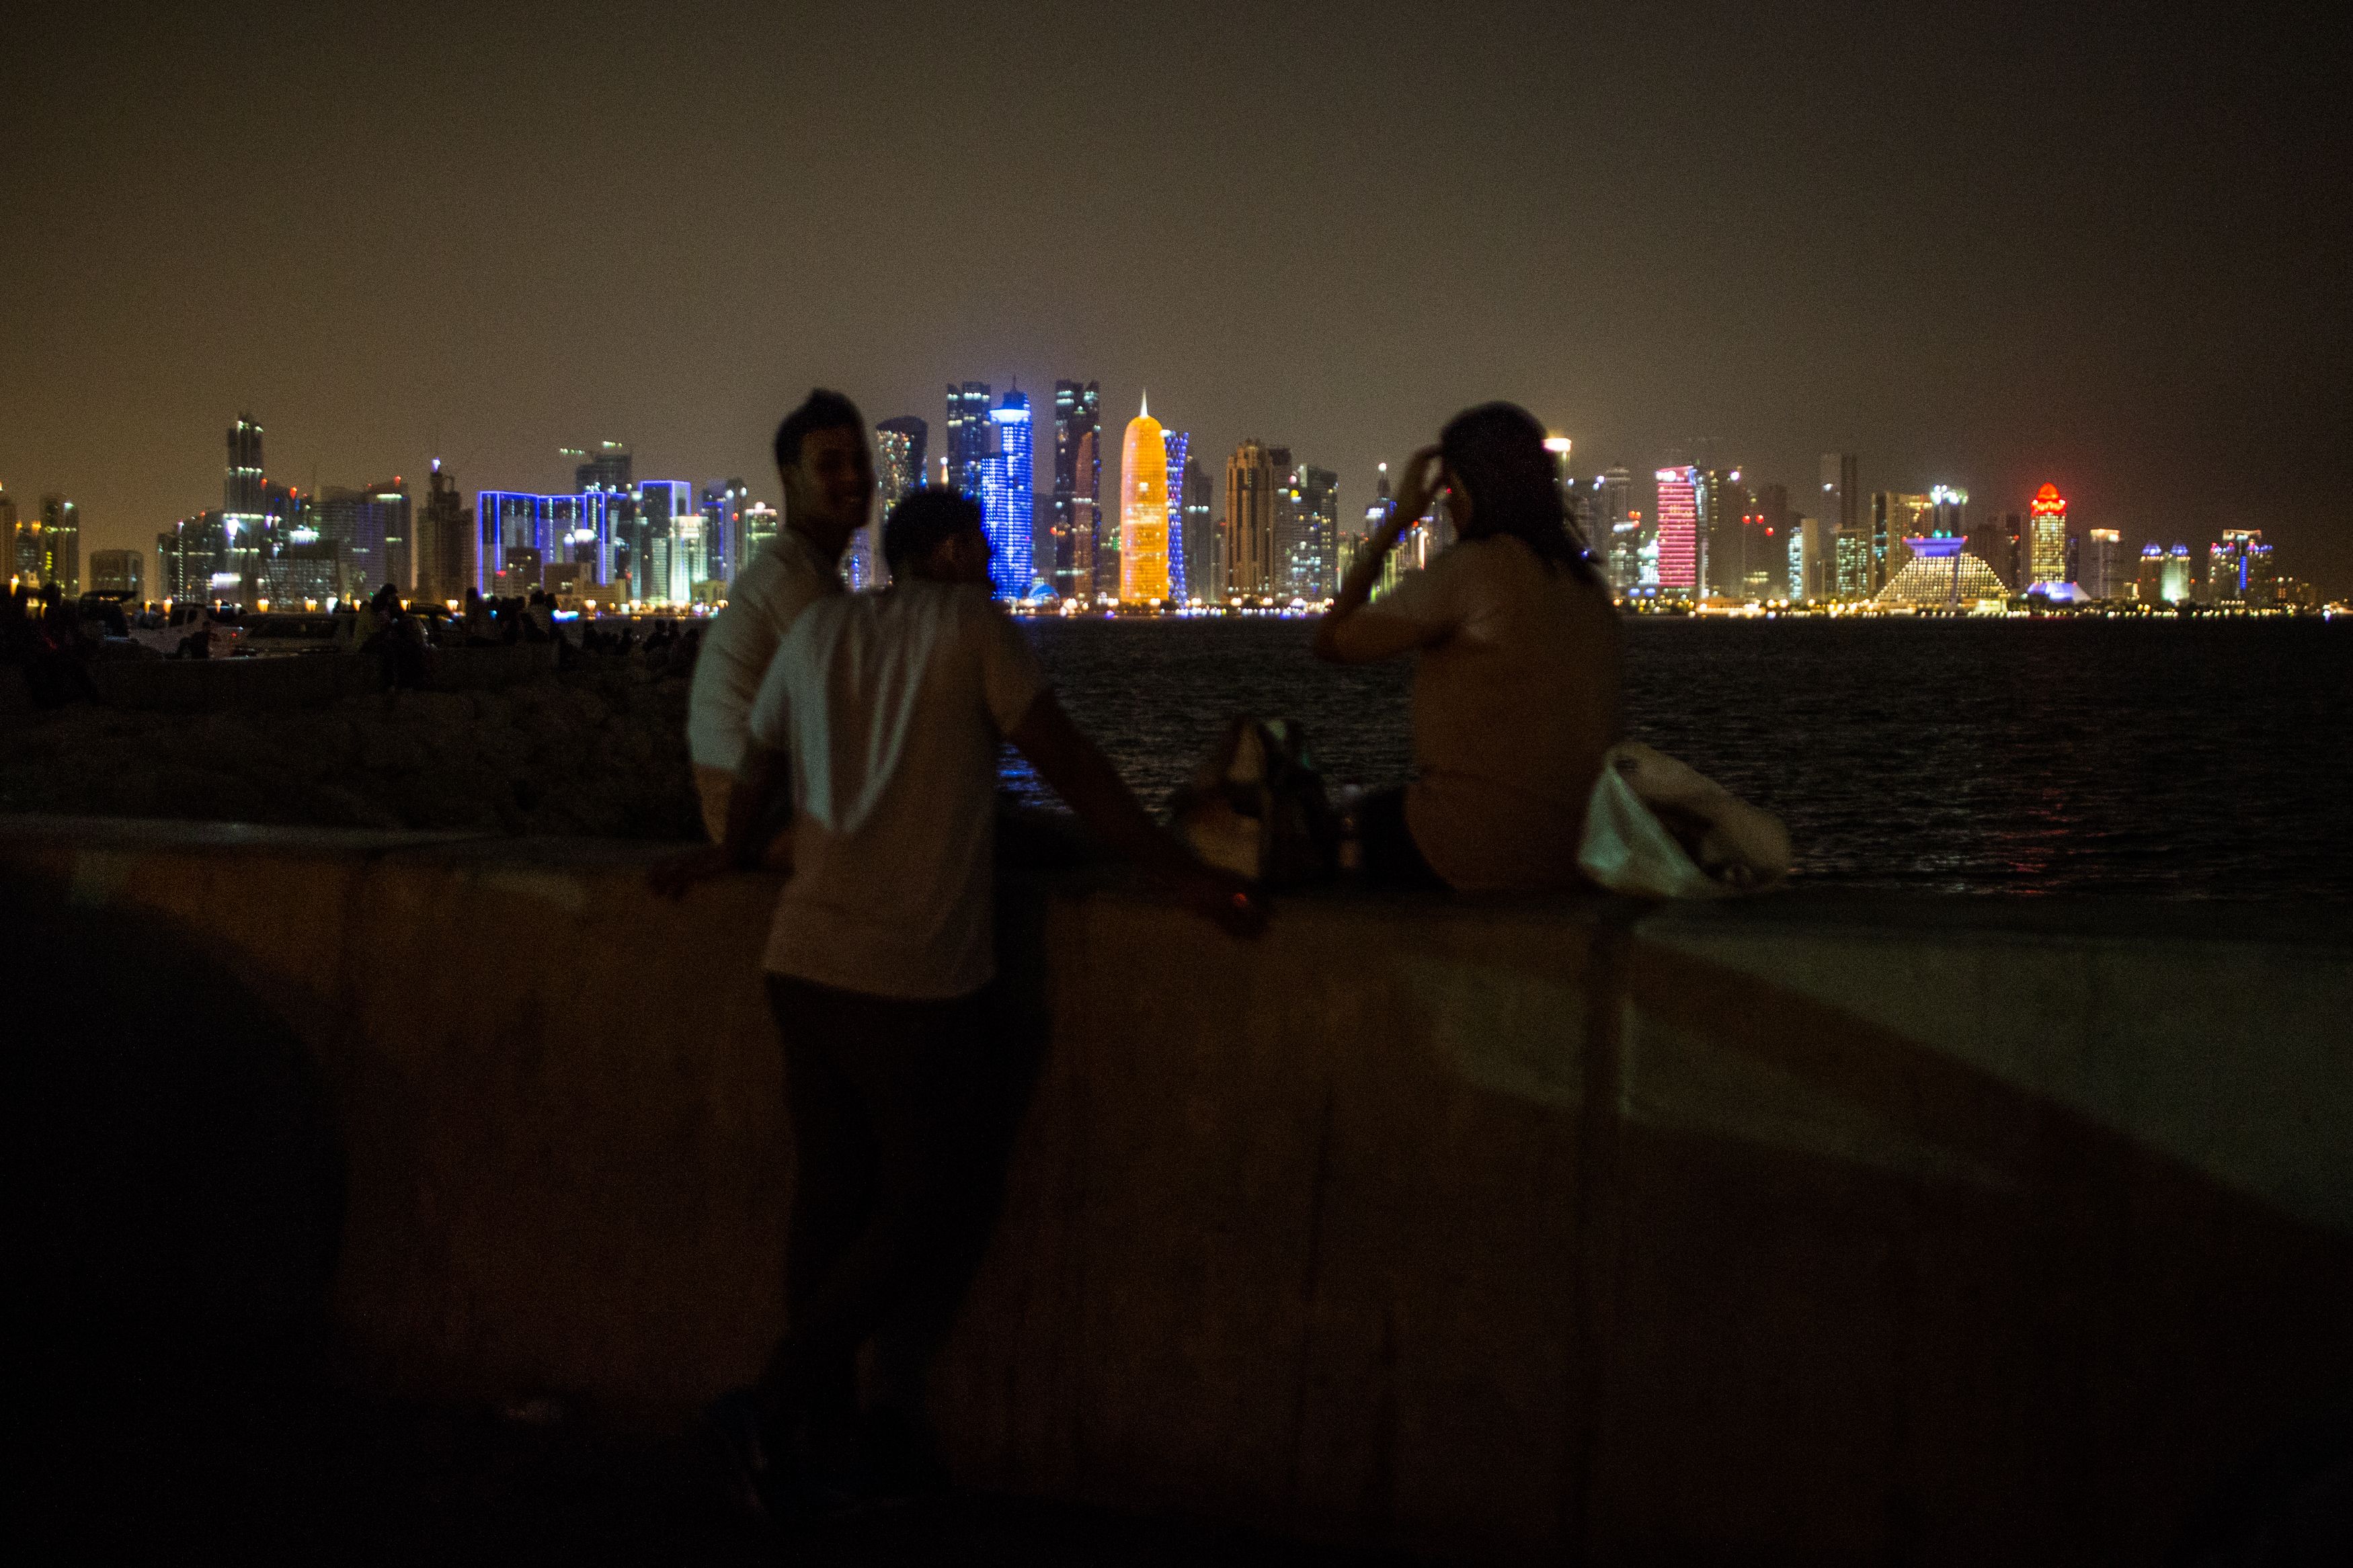 Doha's famous boardwalk, The Corniche, is a popular meet and make out place. Image by OM. Qatar, 2017.